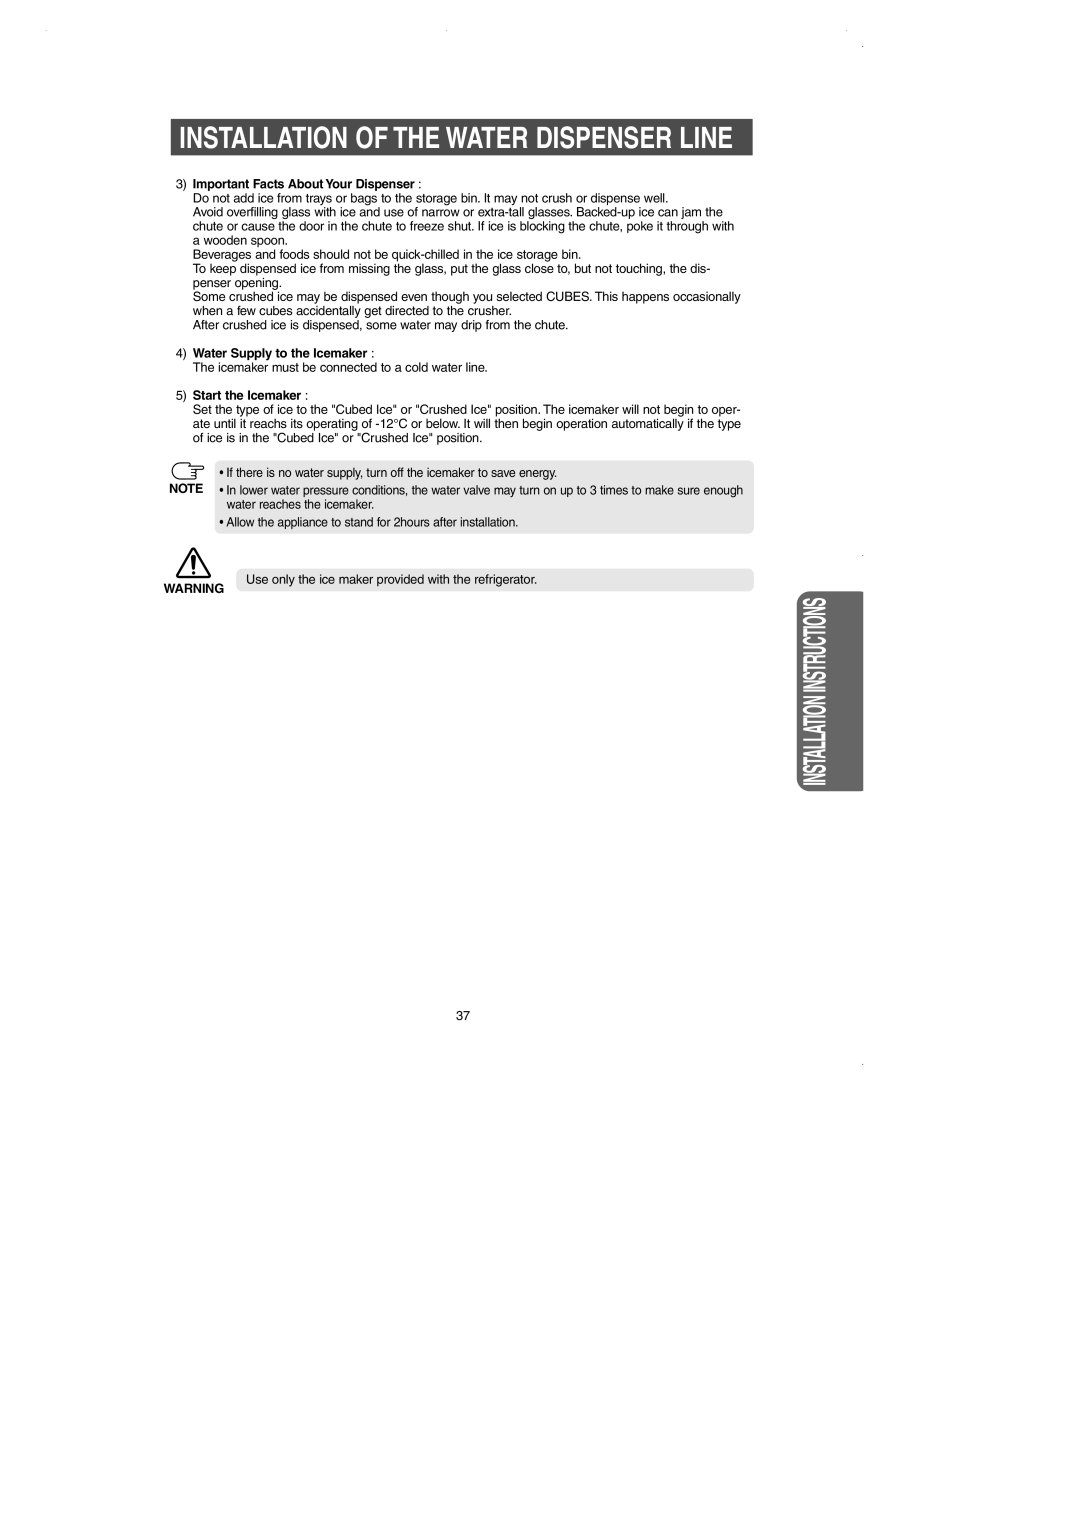 Samsung DA99-01225E Installation Of The Water Dispenser Line, Installation Instructions, Water Supply to the Icemaker 